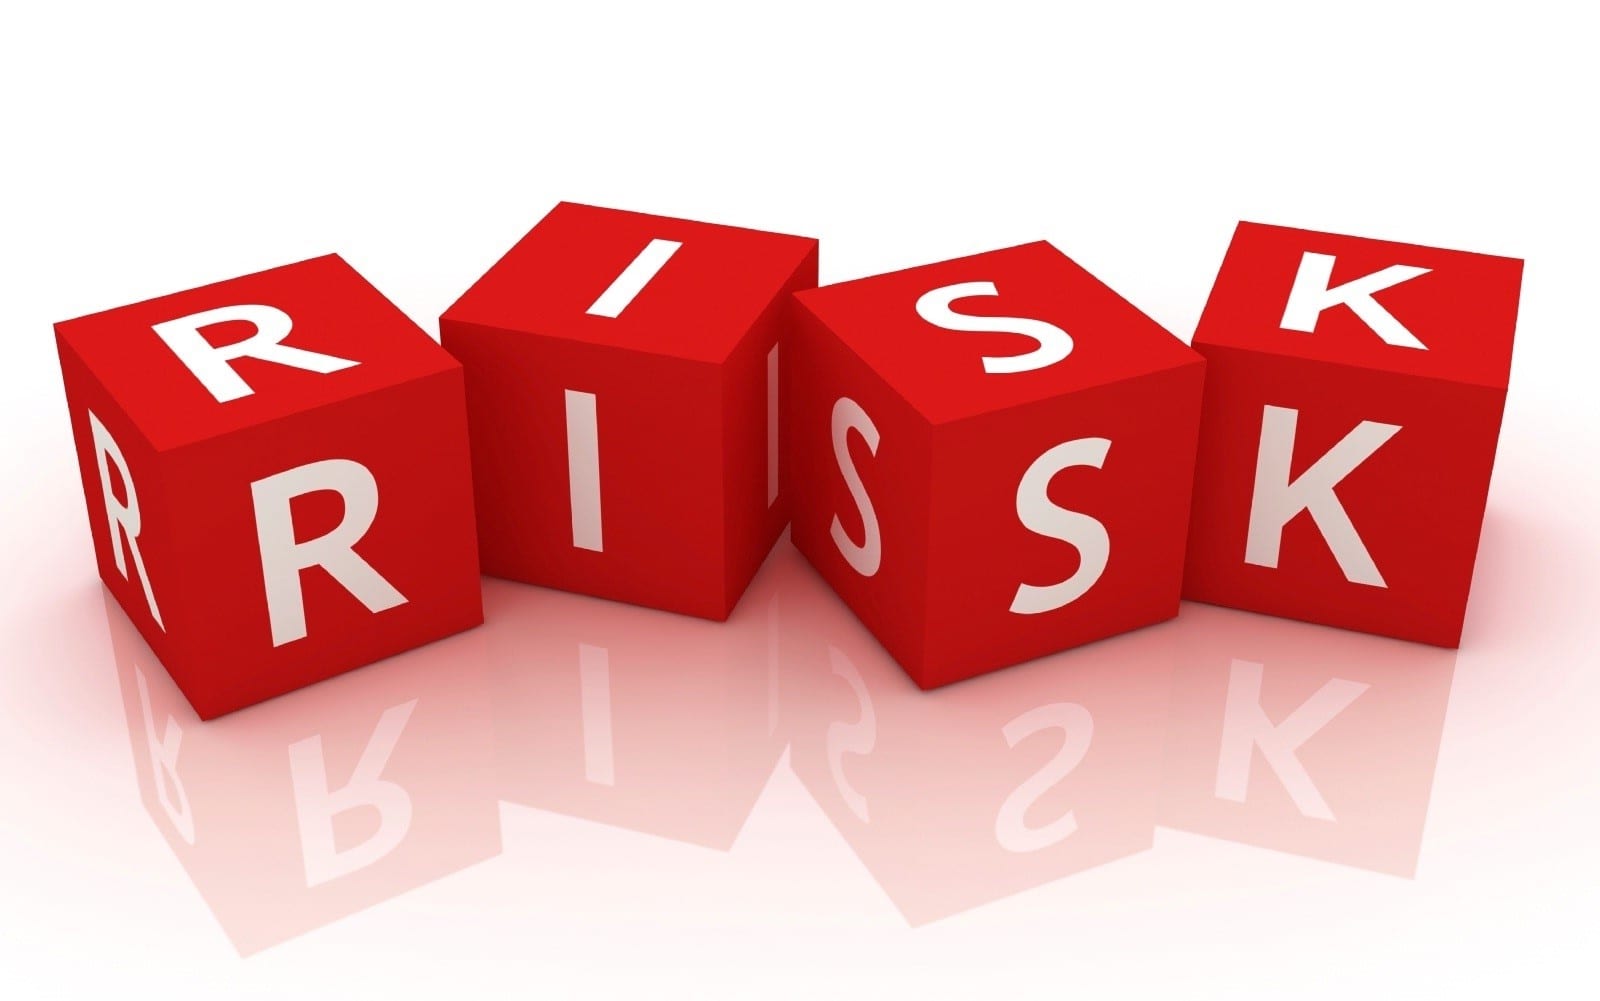 MCCDC: The Growing Edge of Risk Taking